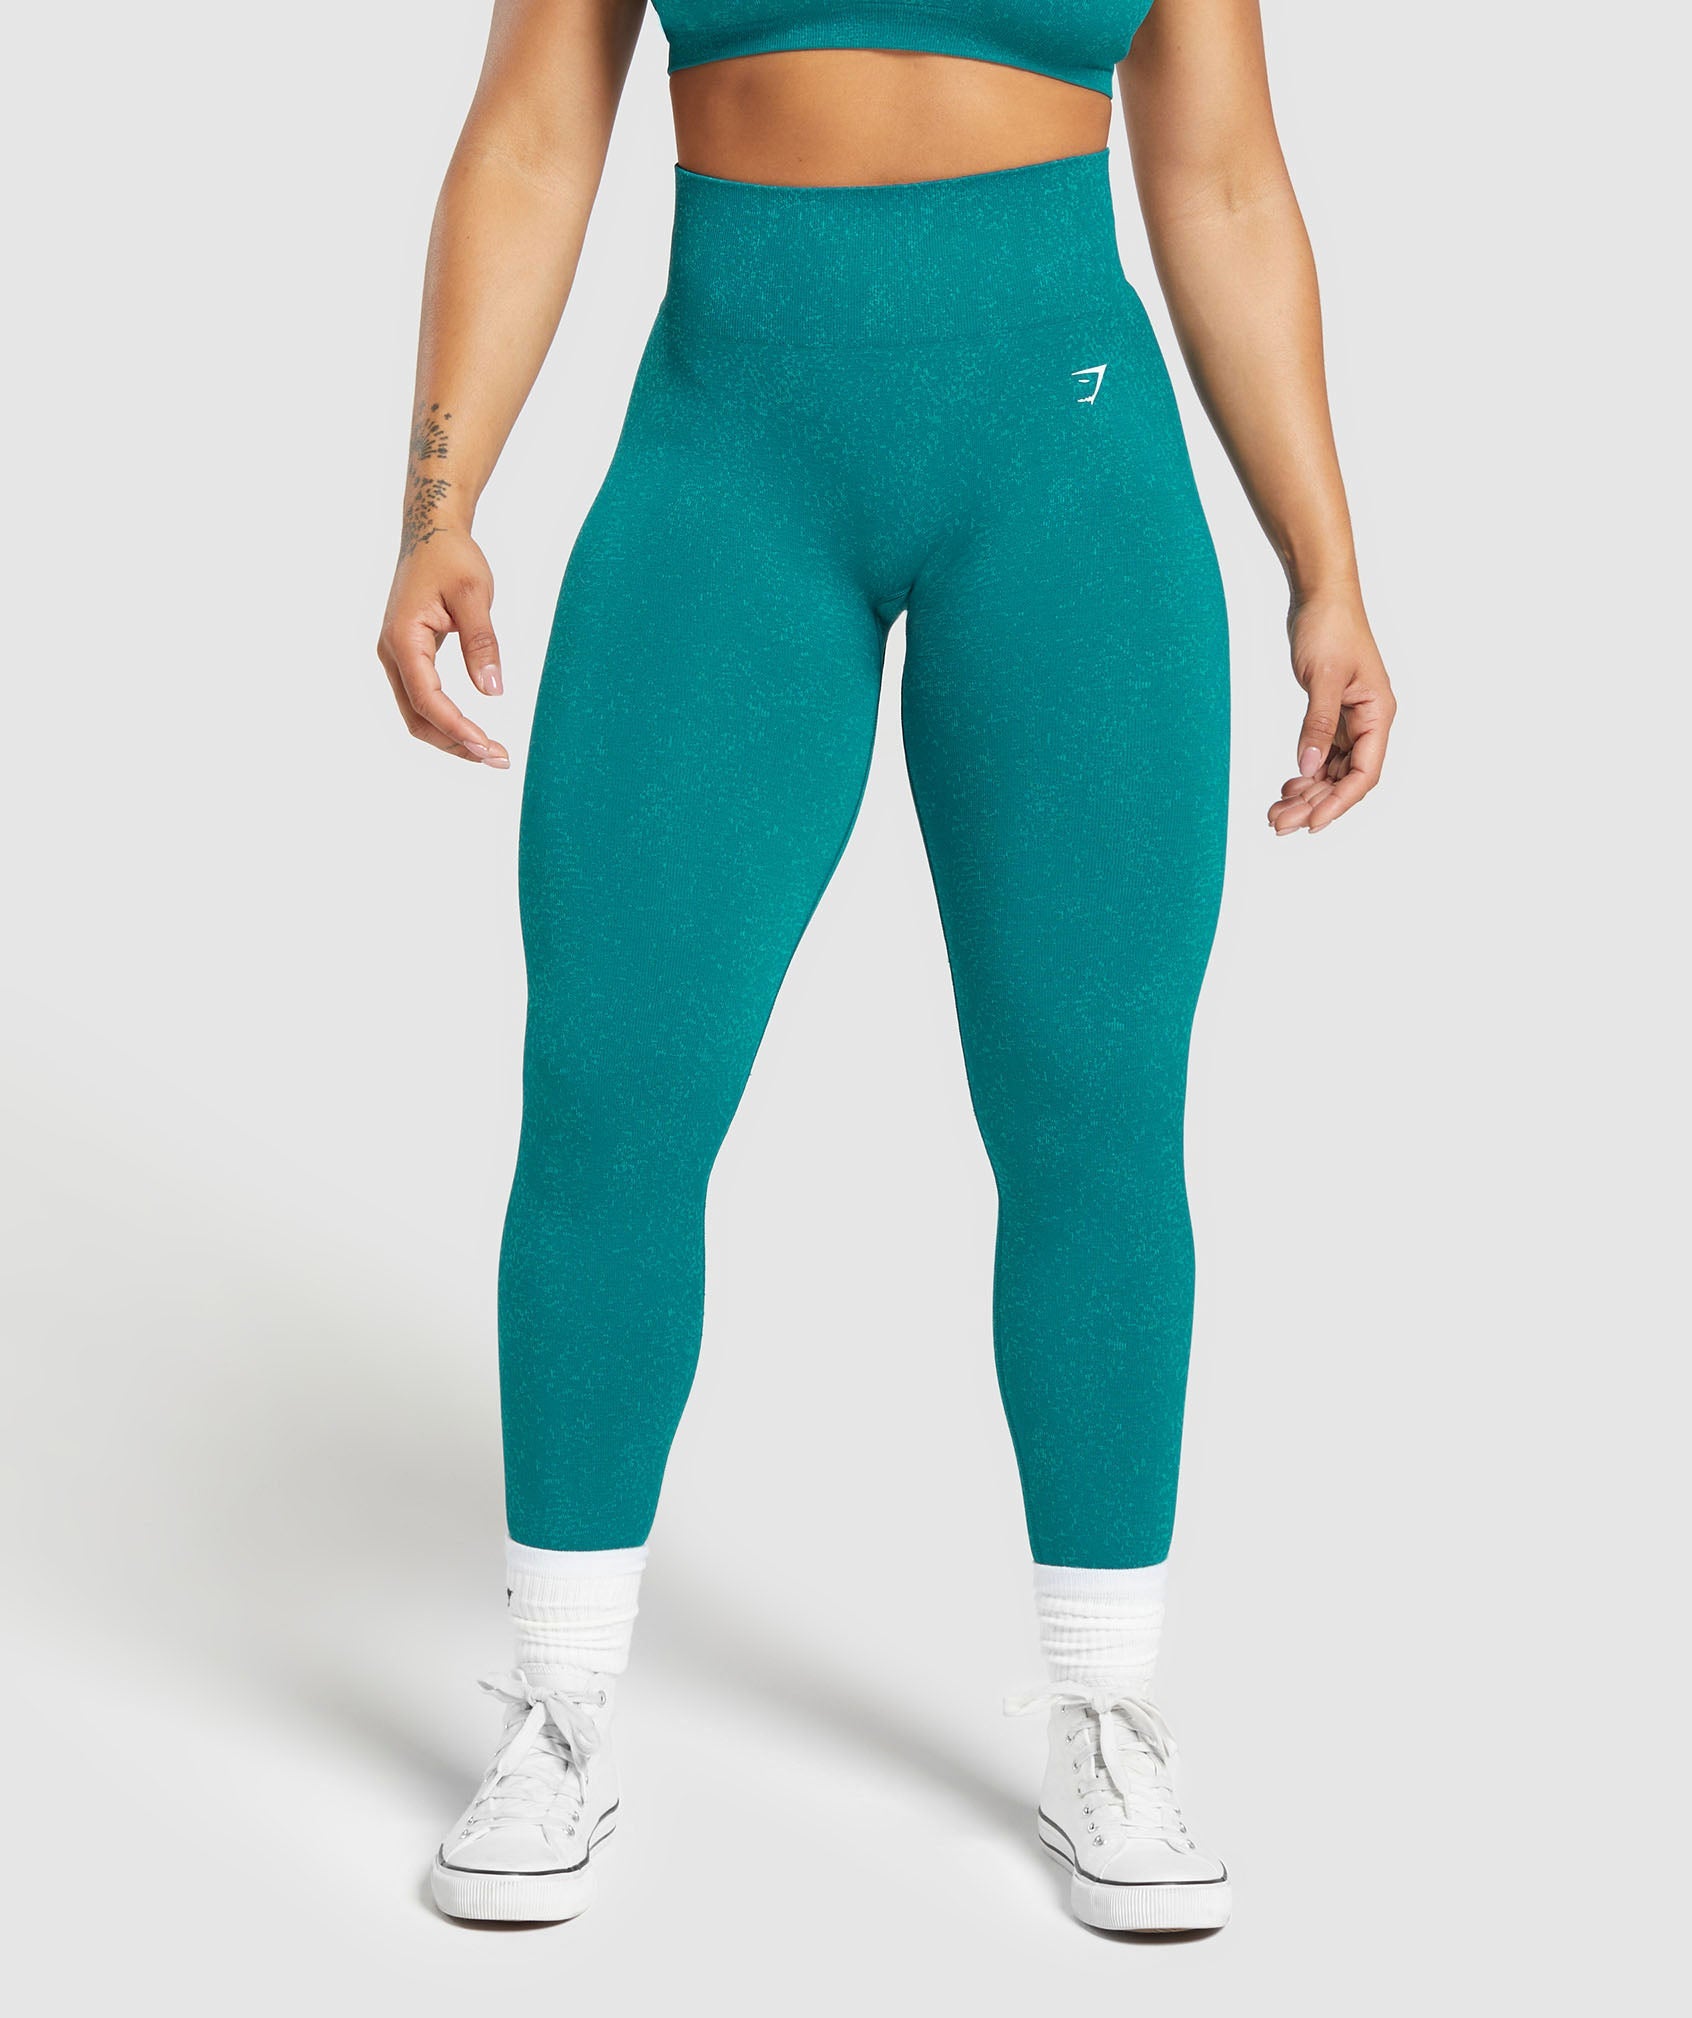 Buy Gymshark Green Fit Tights online